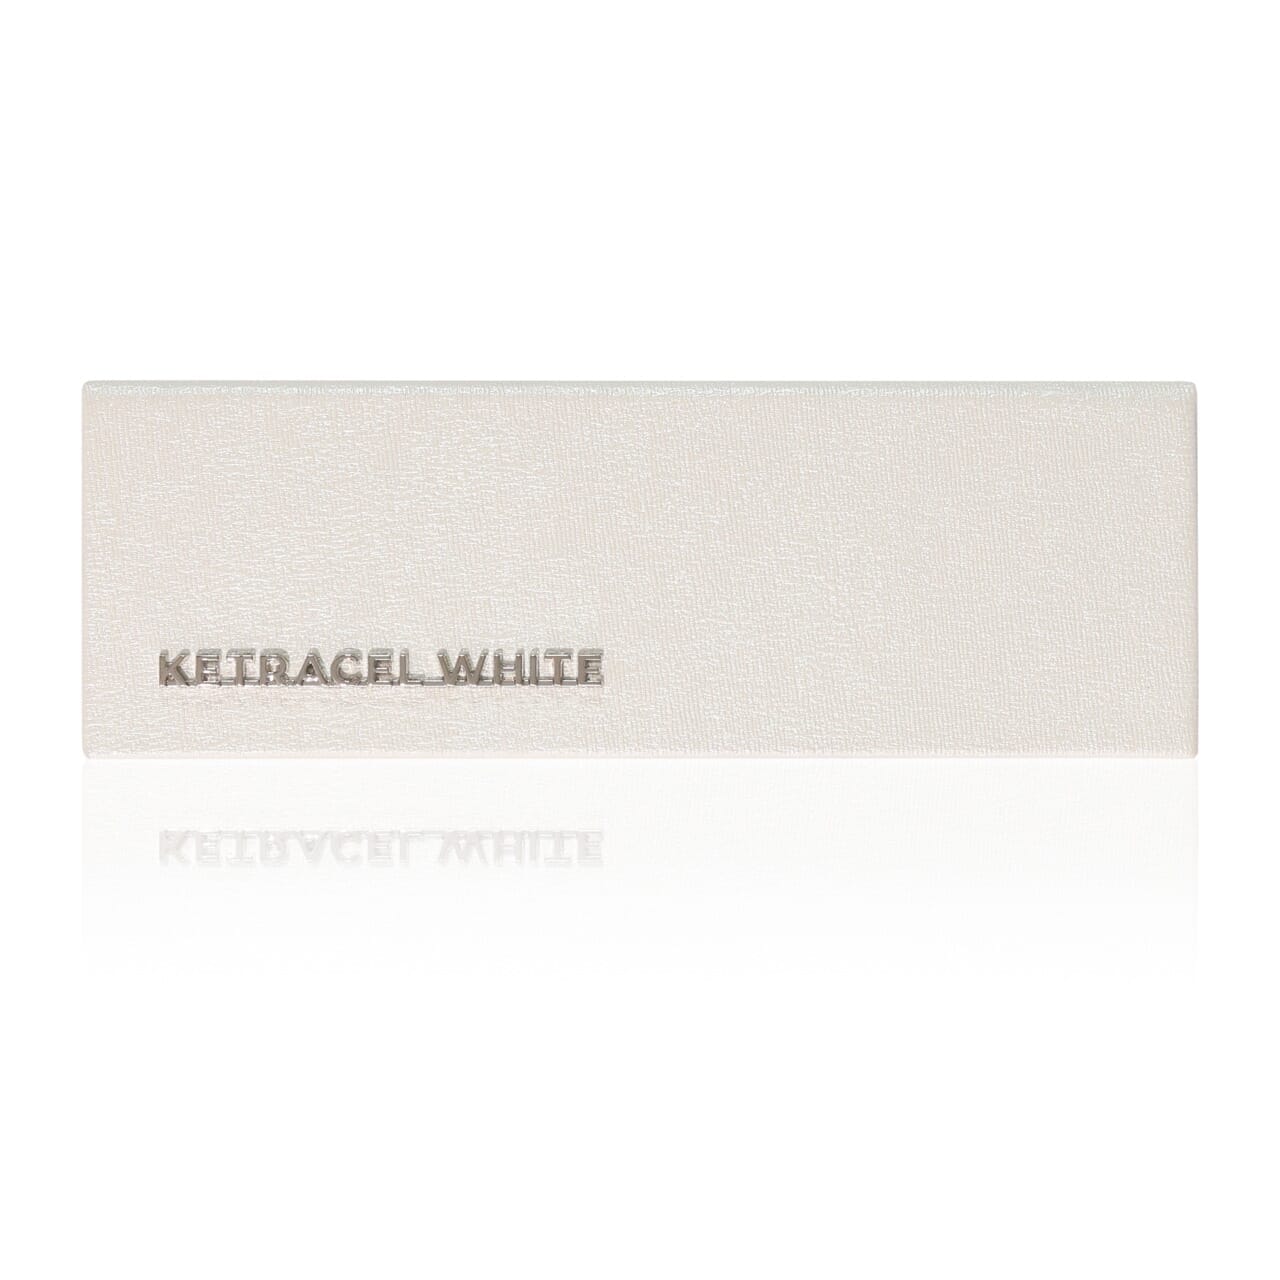 Ketracel White Multi Use Palette (Limited Edition)